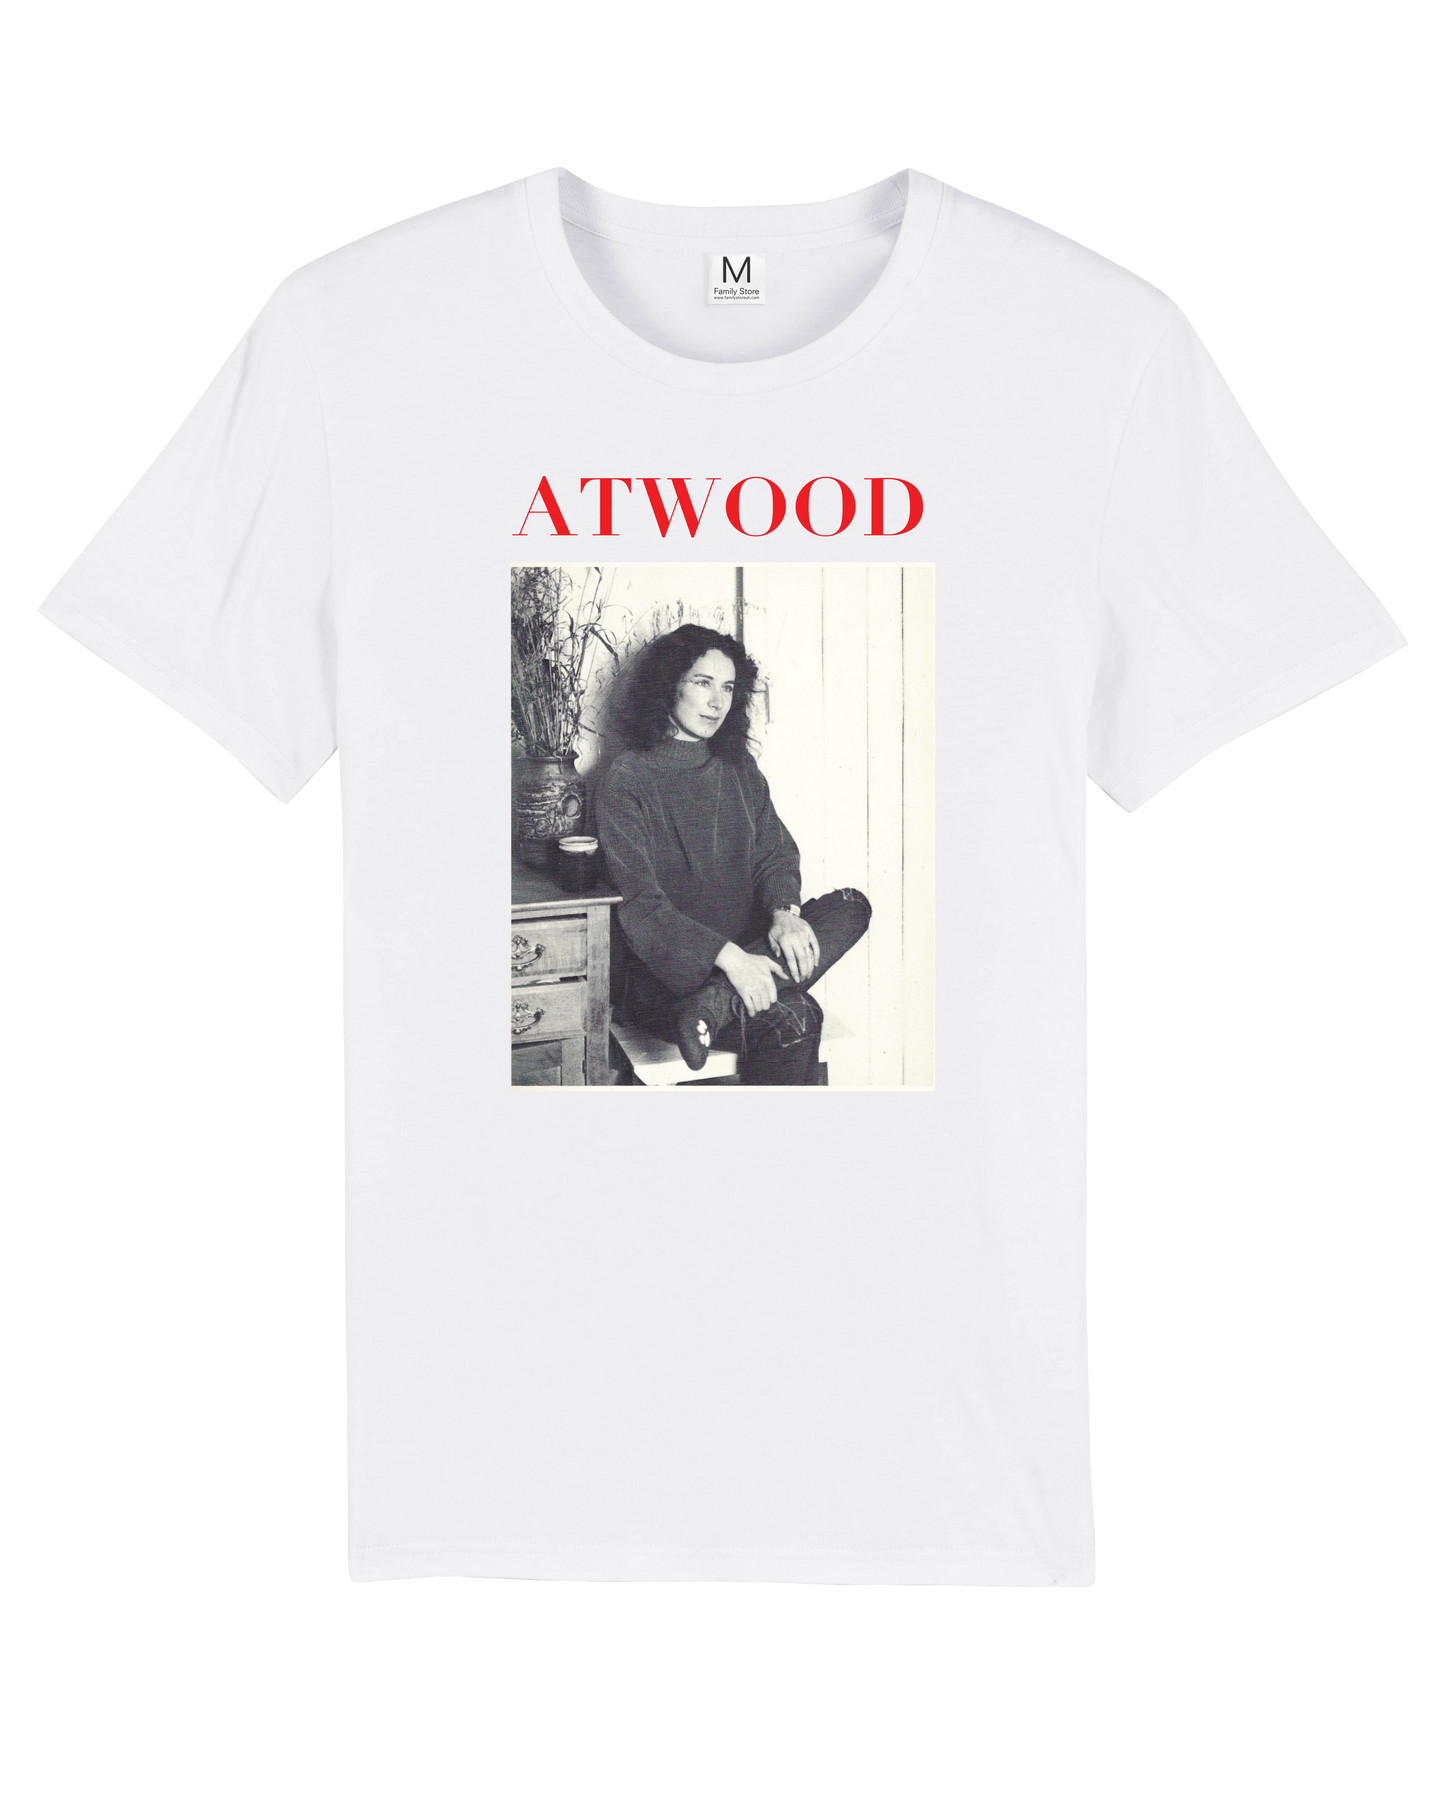 Atwood white Tee by Brandt